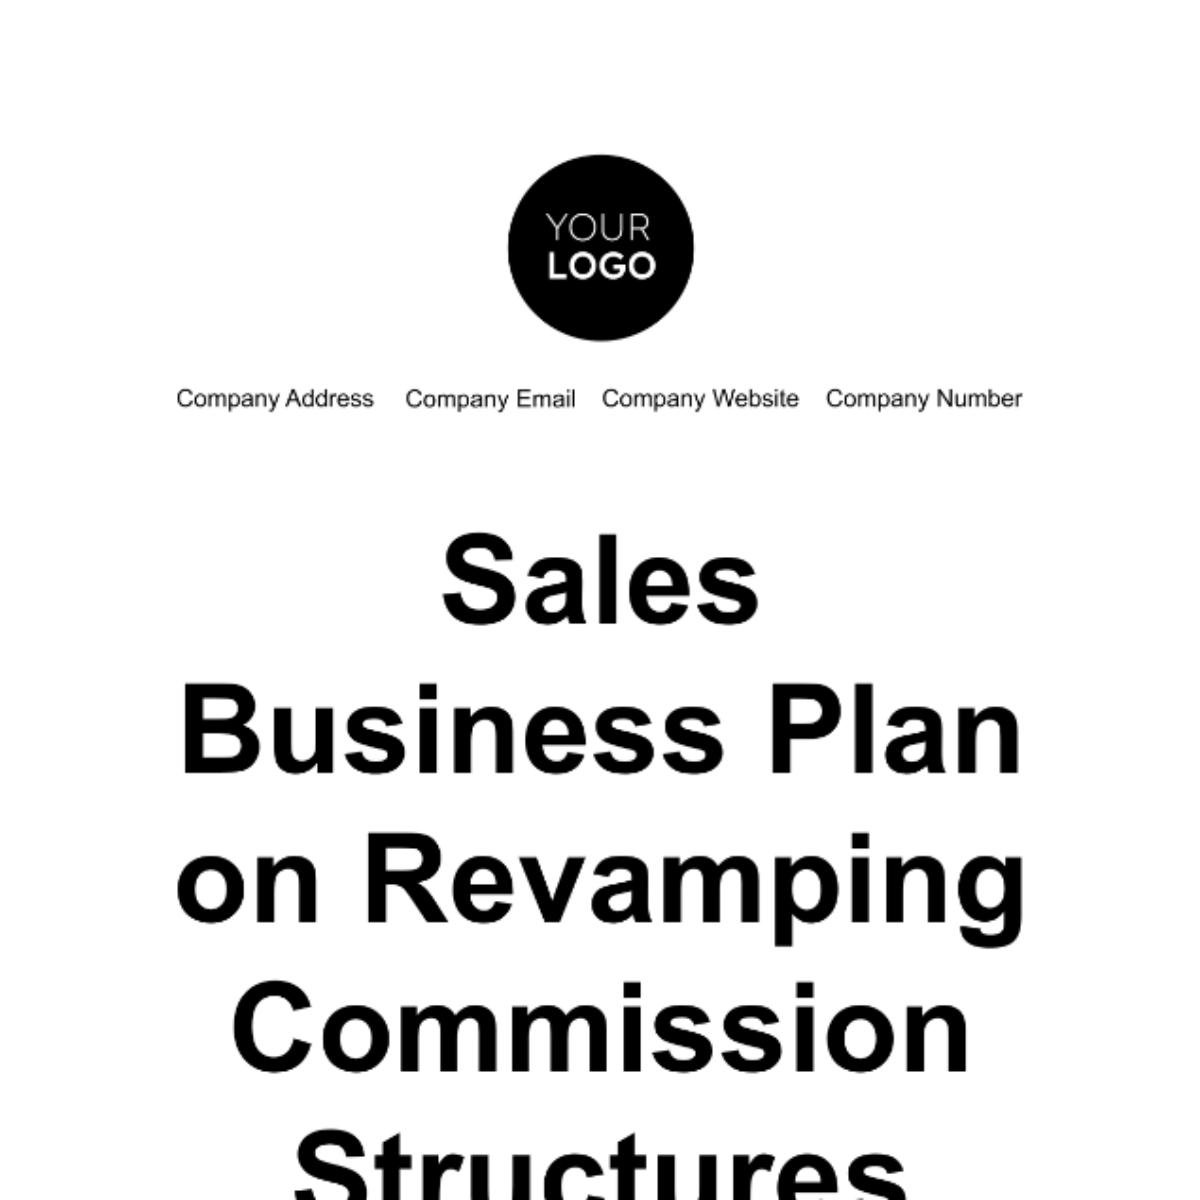 Sales Business Plan on Revamping Commission Structures Template